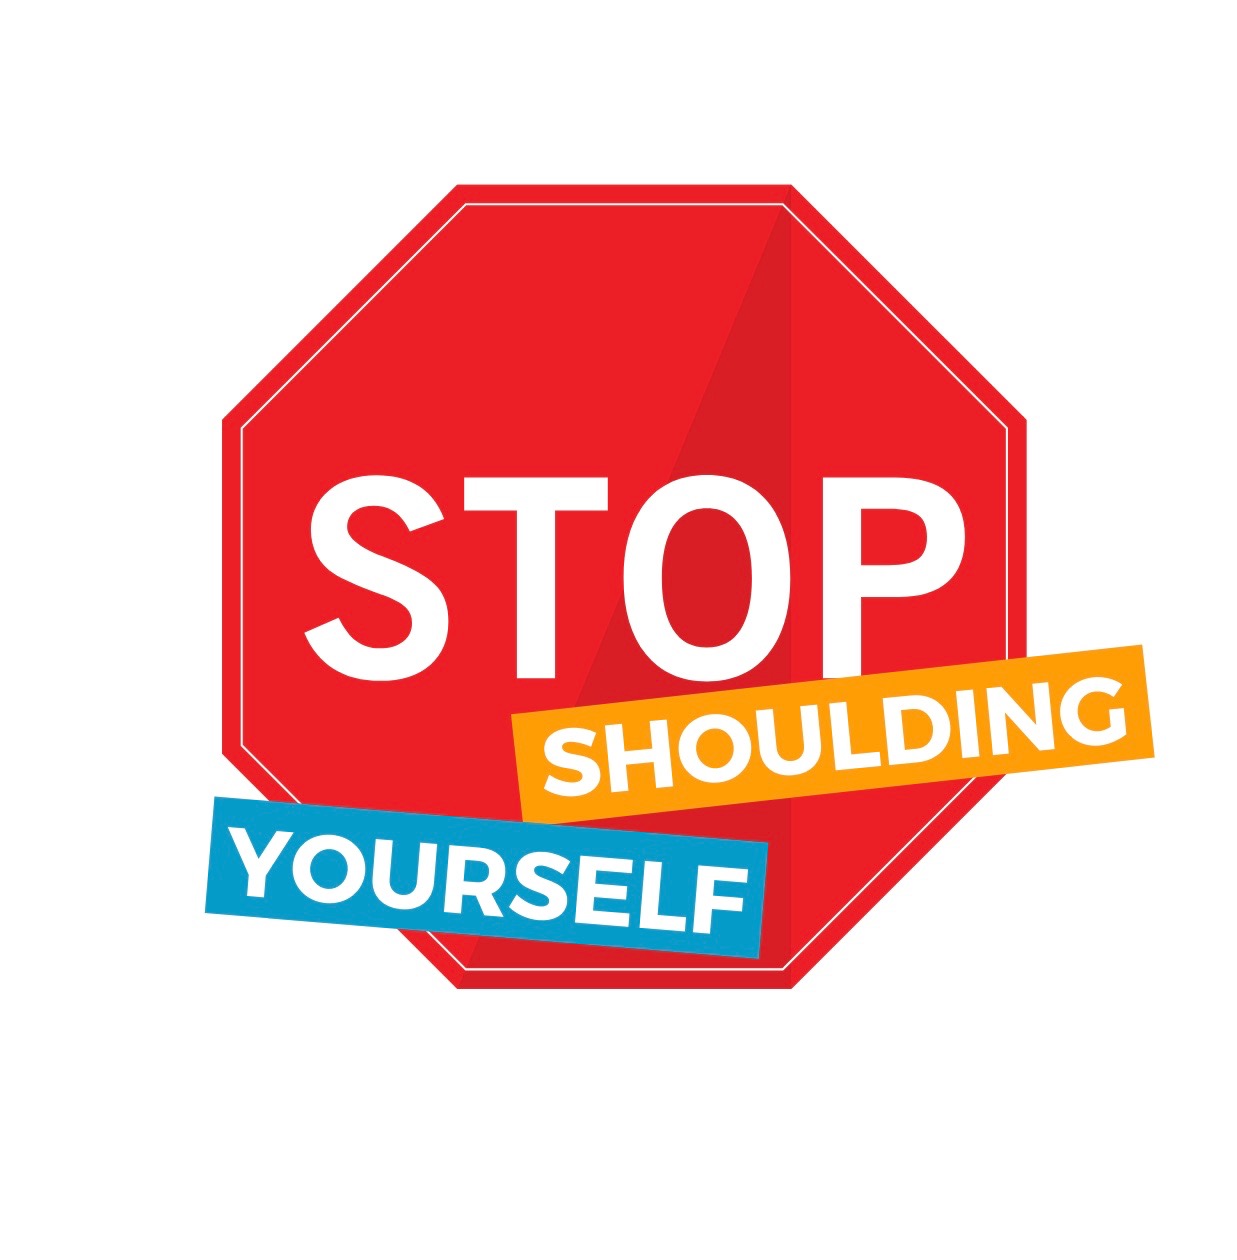 How to Stop Shoulding Yourself